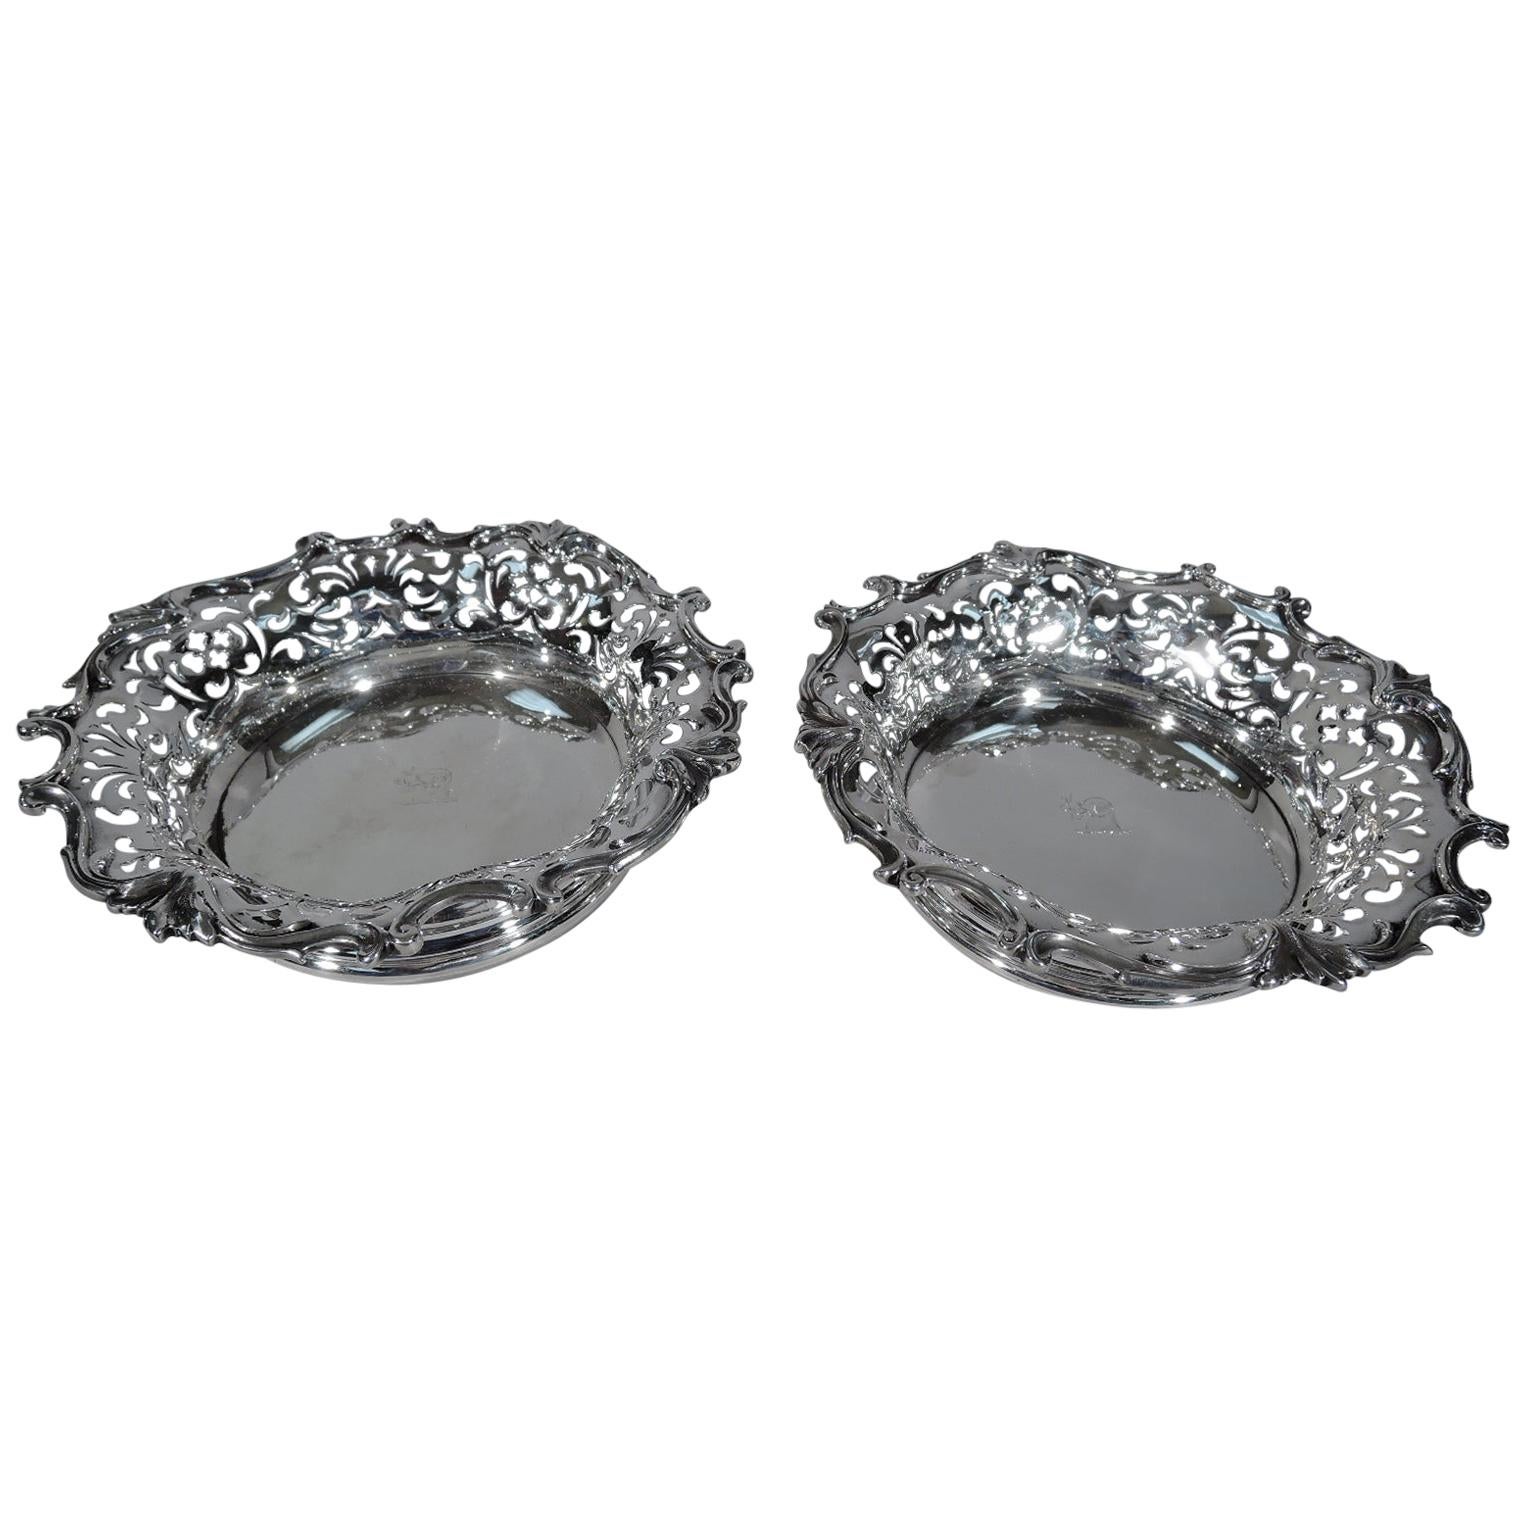 Pair of Antique Sterling Silver Wine Coasters by Howard of New York